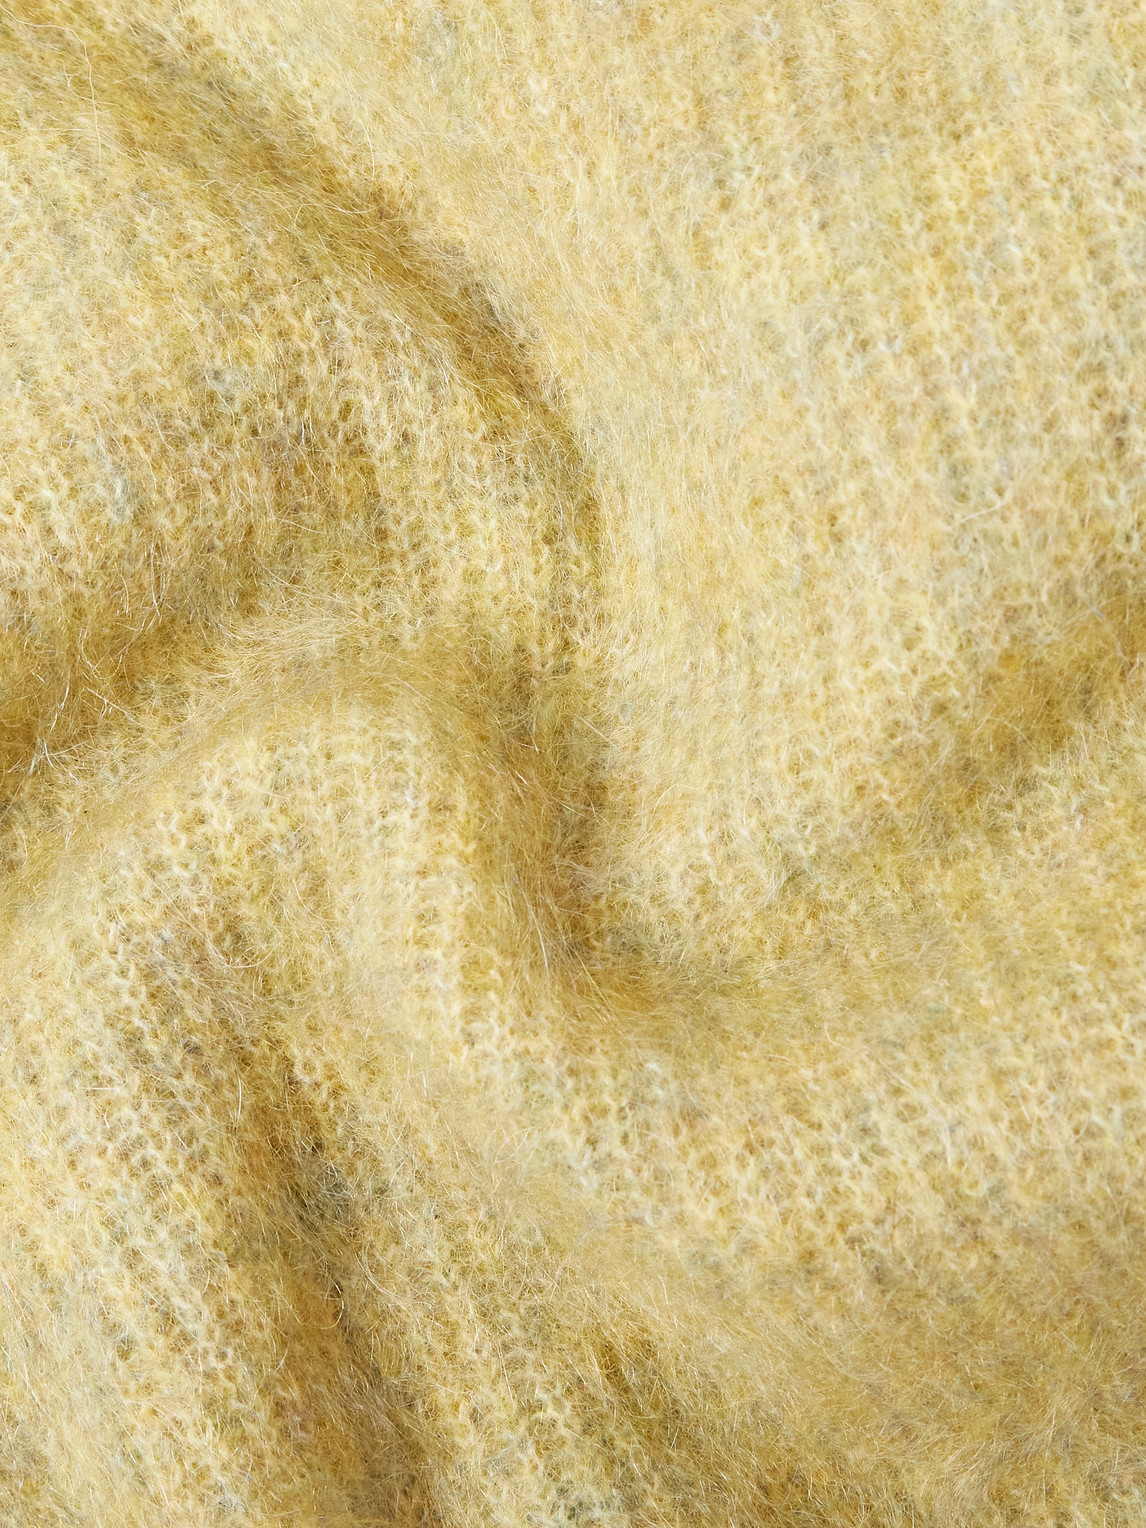 Shop Séfr Kaito Brushed Mohair-blend Cardigan In Yellow